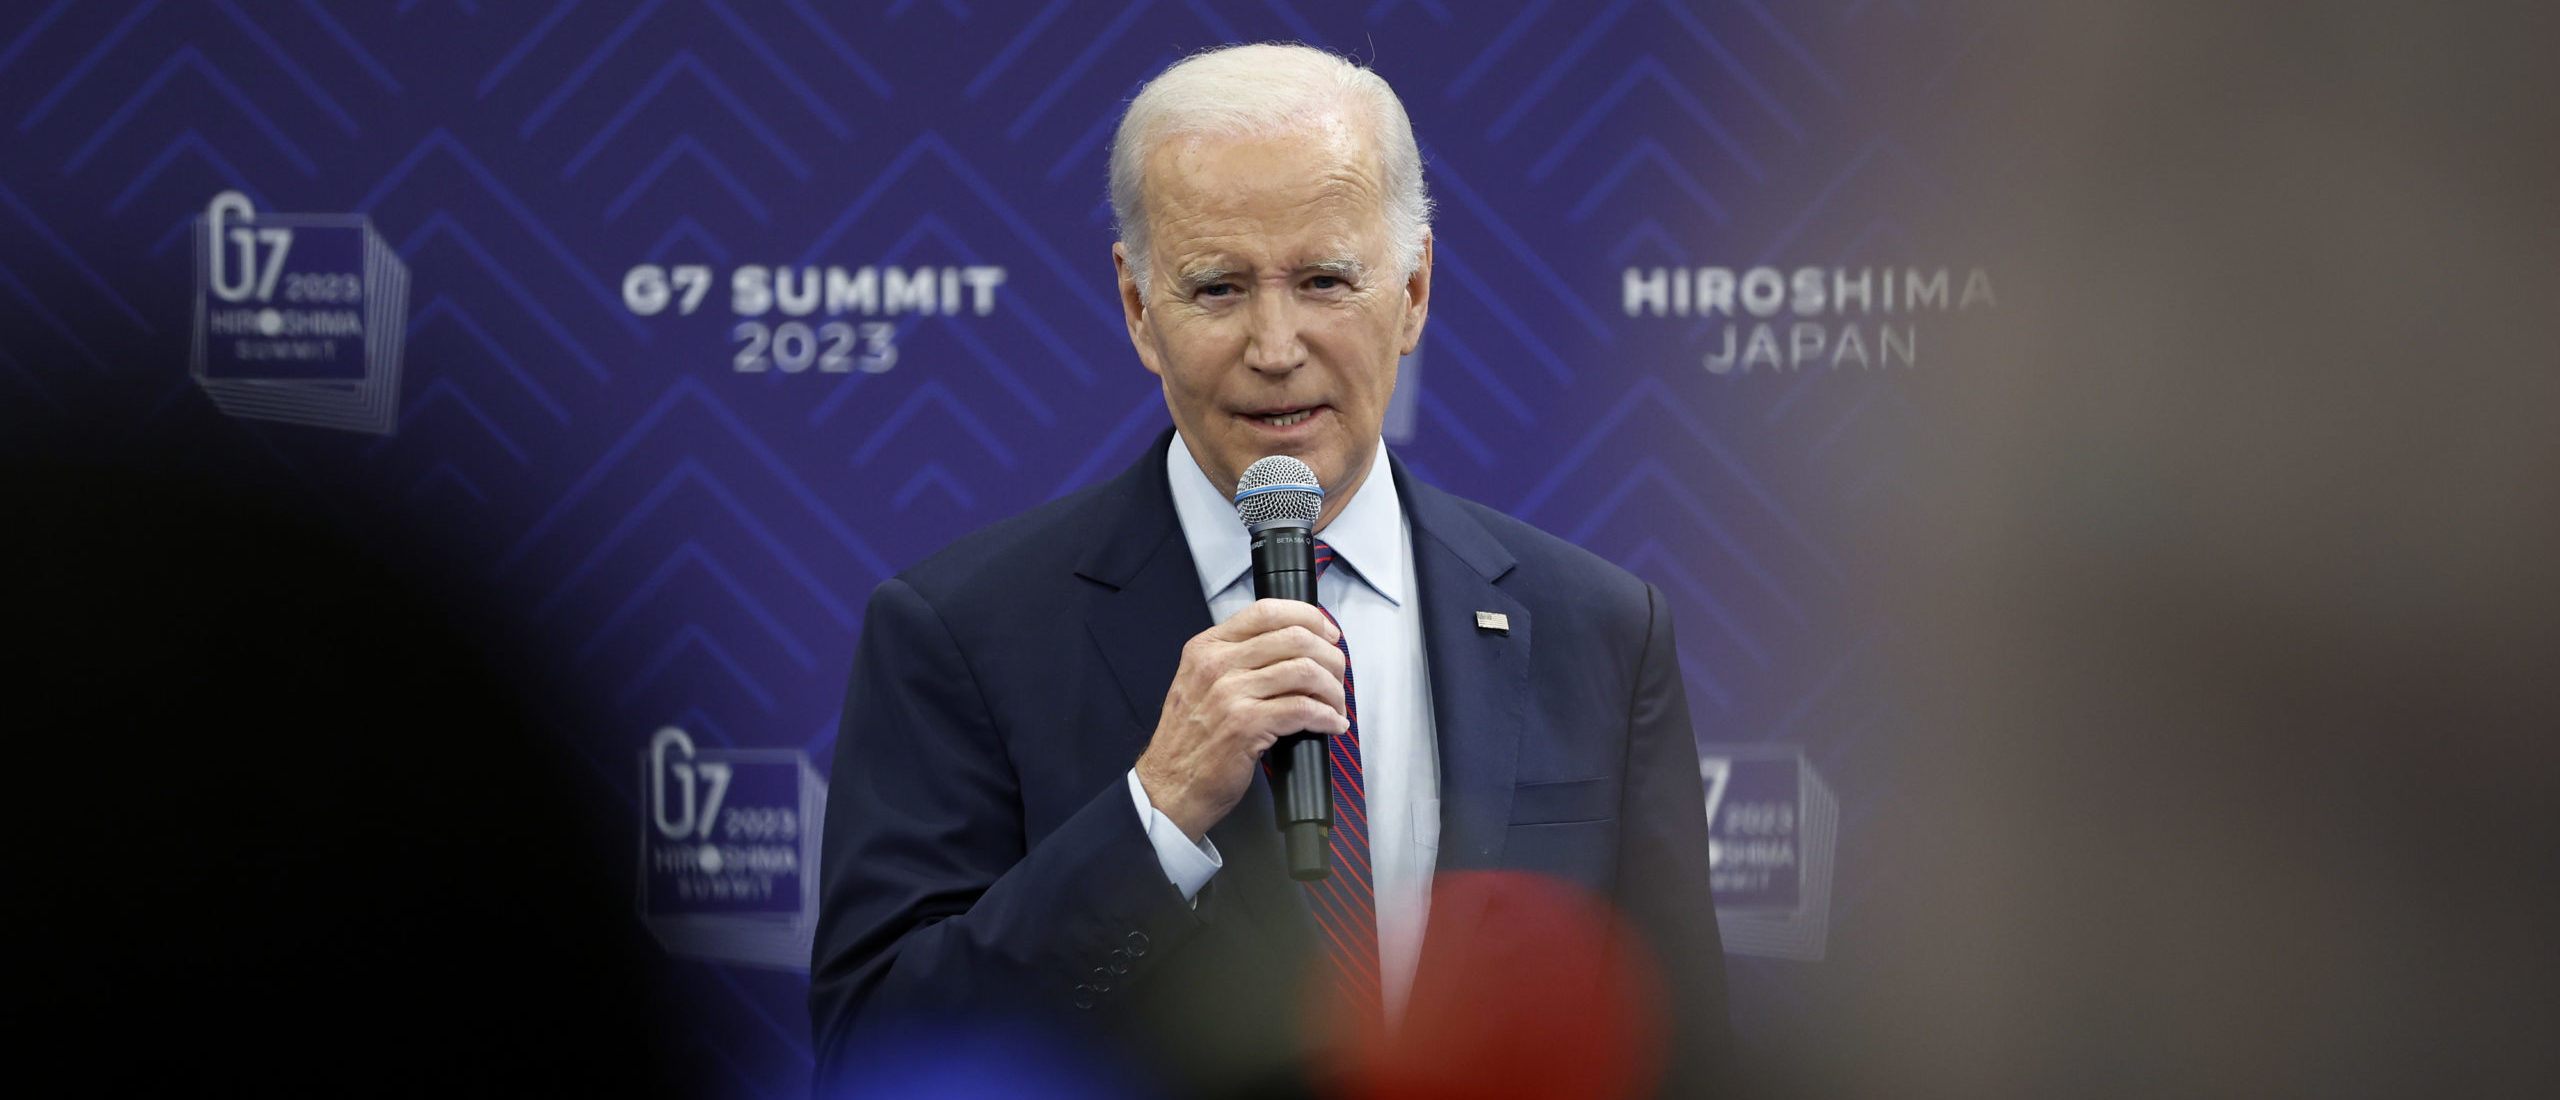 HIROSHIMA, JAPAN - MAY 21: US President Joe Biden speaks during a press conference, following the conclusion of the G7 Summit Leaders' Meeting on May 21, 2023 in Hiroshima, Japan. The G7 summit will be held in Hiroshima from 19-22 May. (Photo by Kiyoshi Ota - Pool/Getty Images)